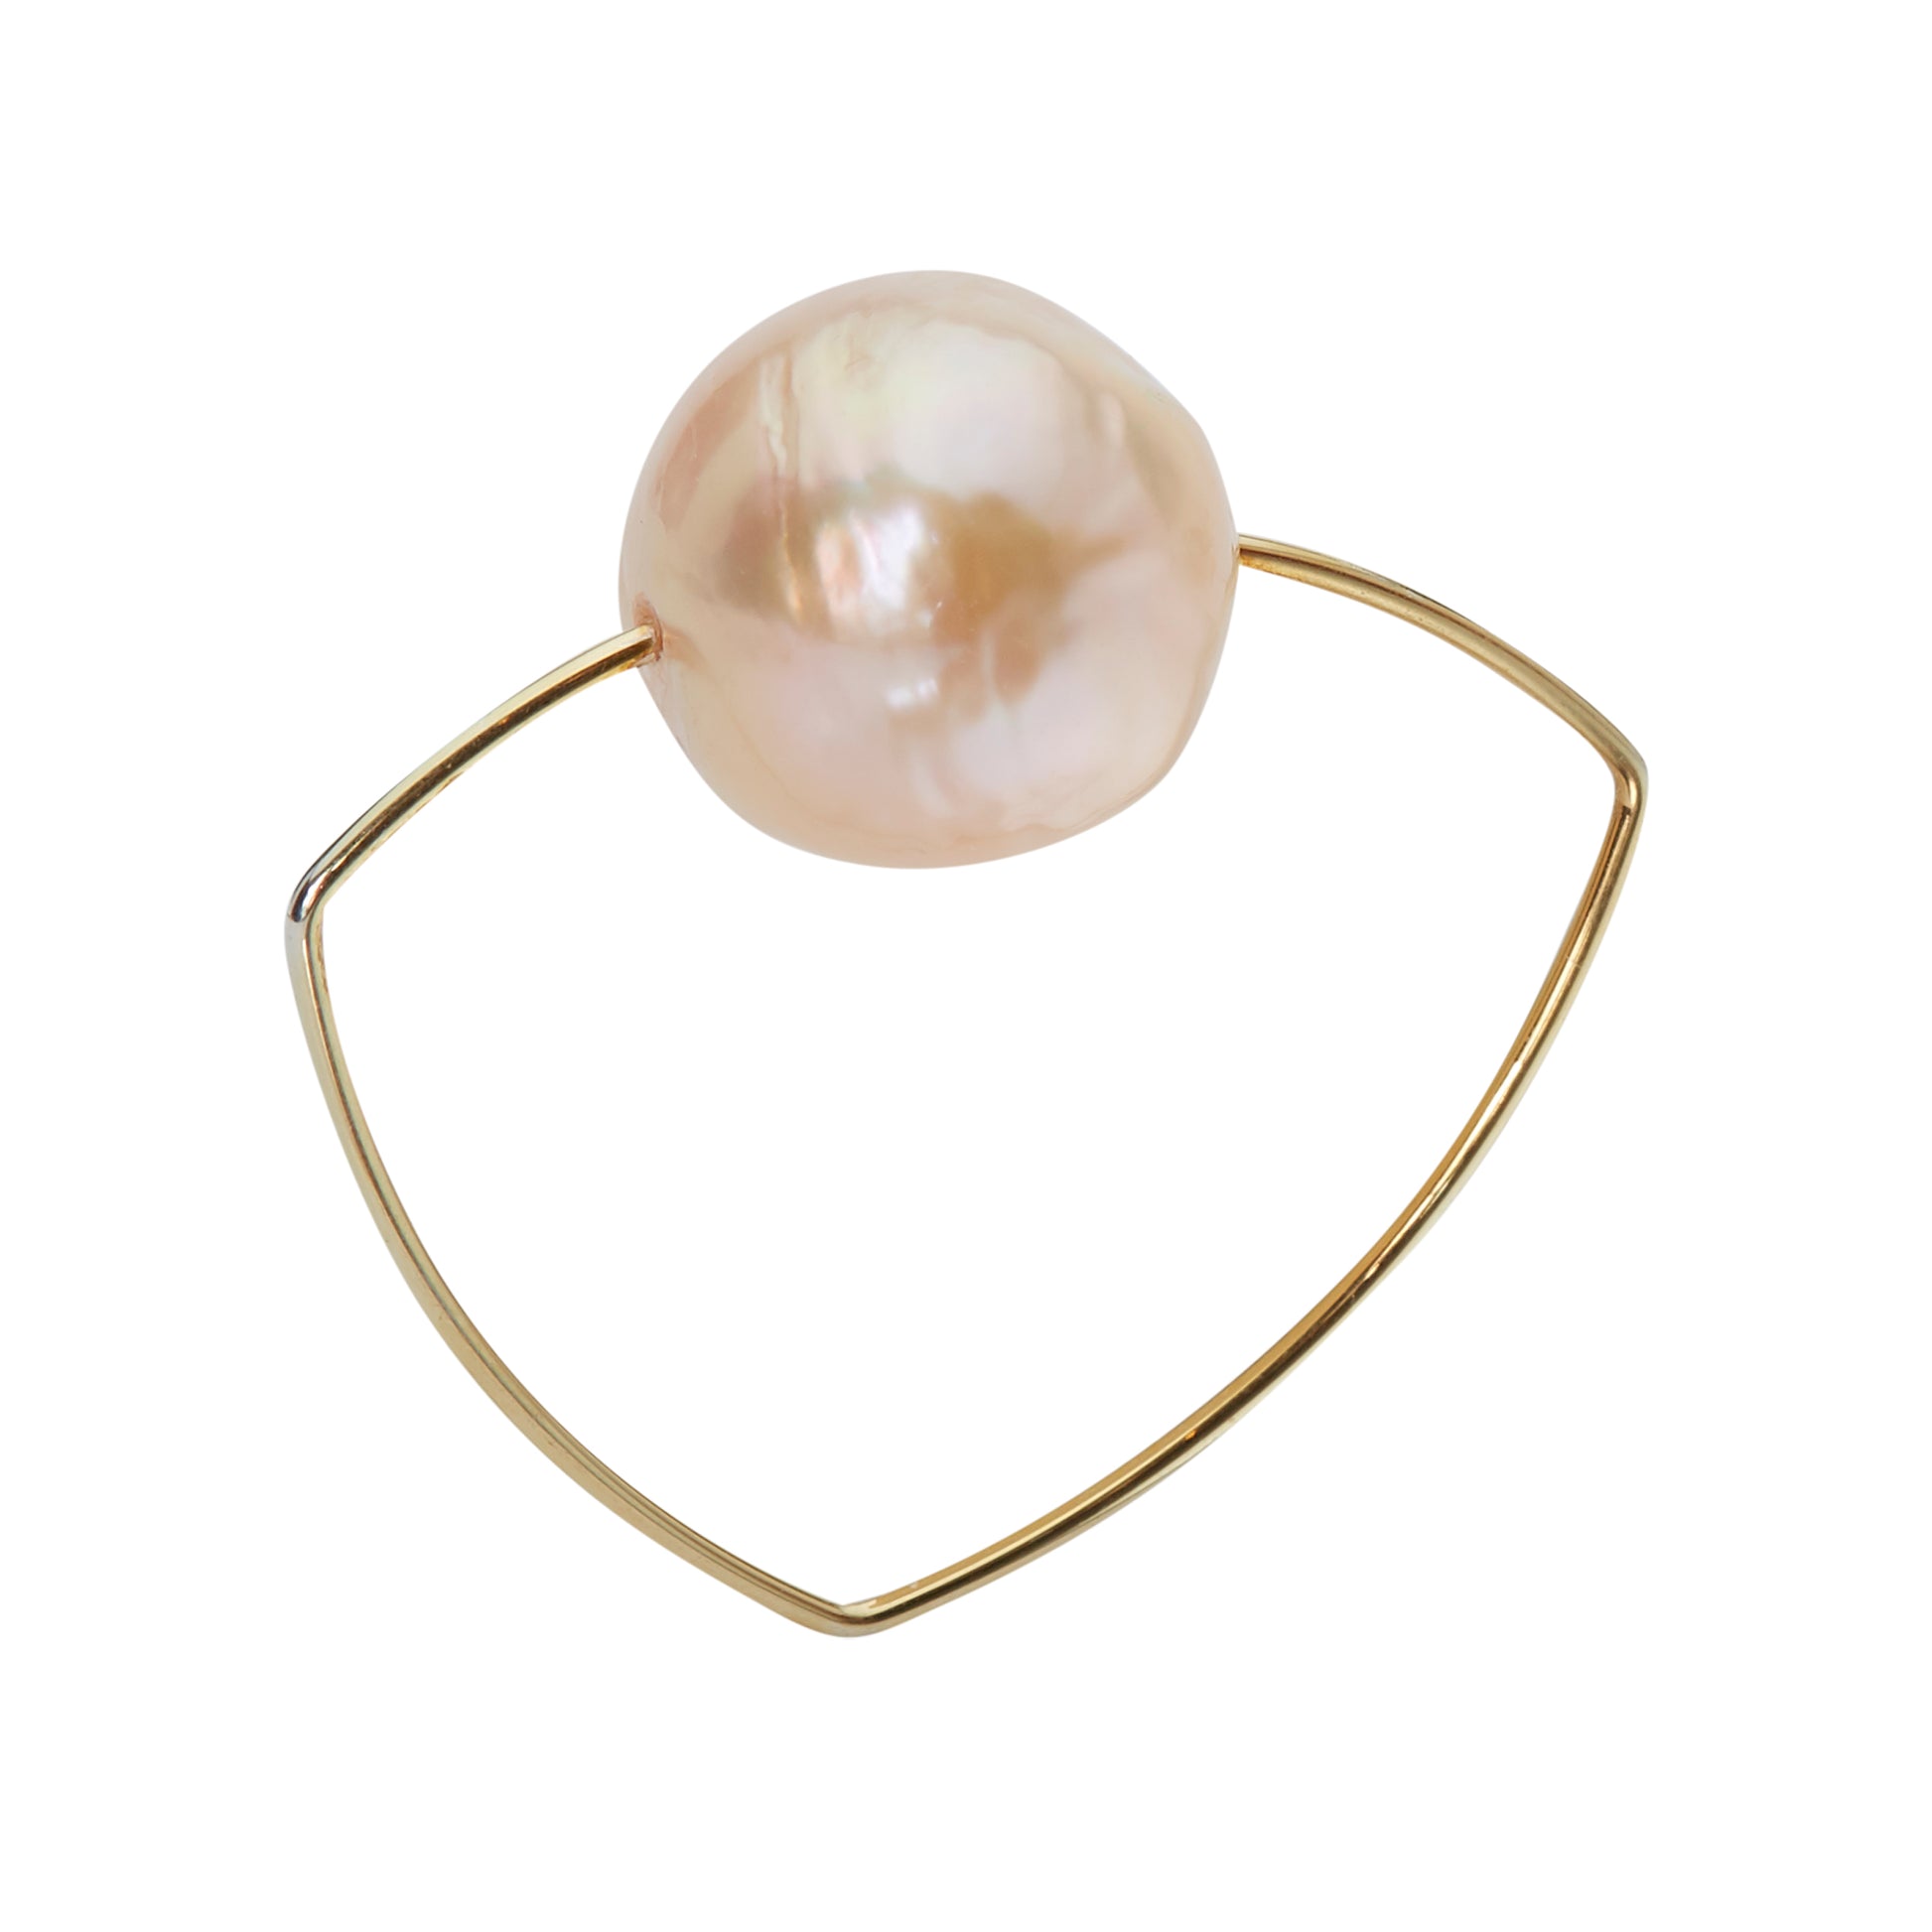 Triangle Ring with Peach Ripley Baroque Pearl (14mm)